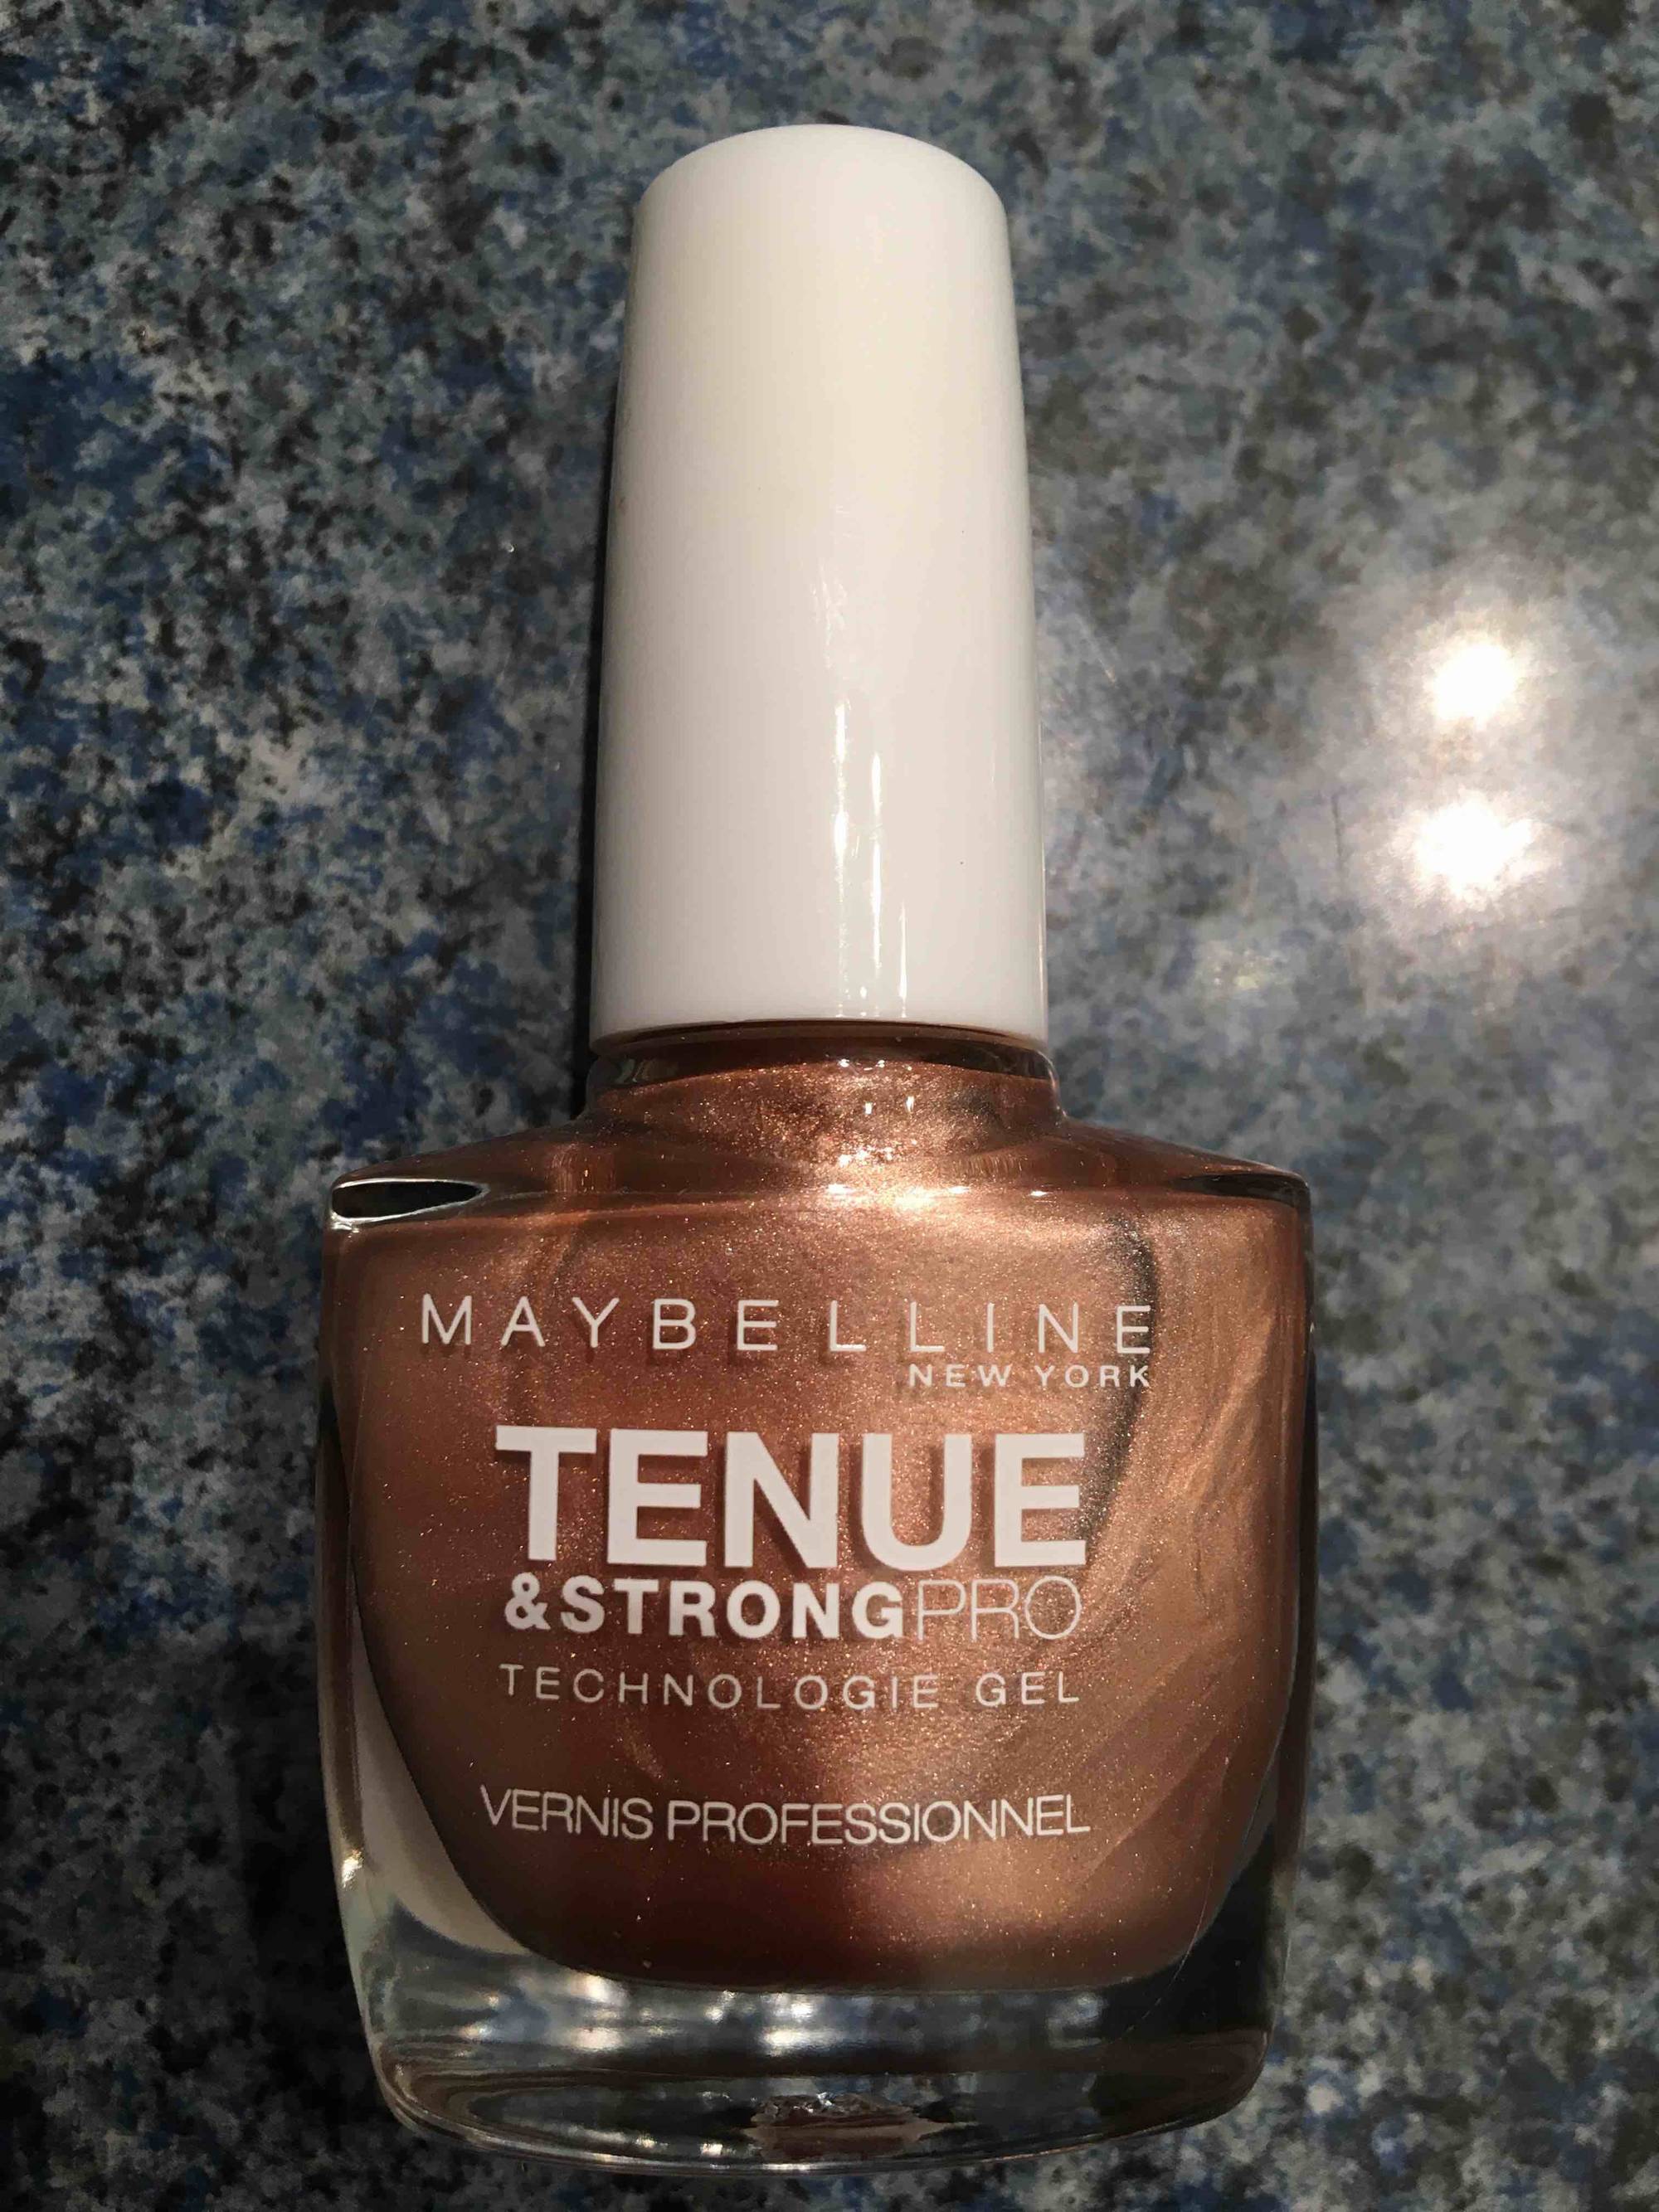 MAYBELLINE - Tenue & strong pro - Vernis professionnel 19-Brun immuable 